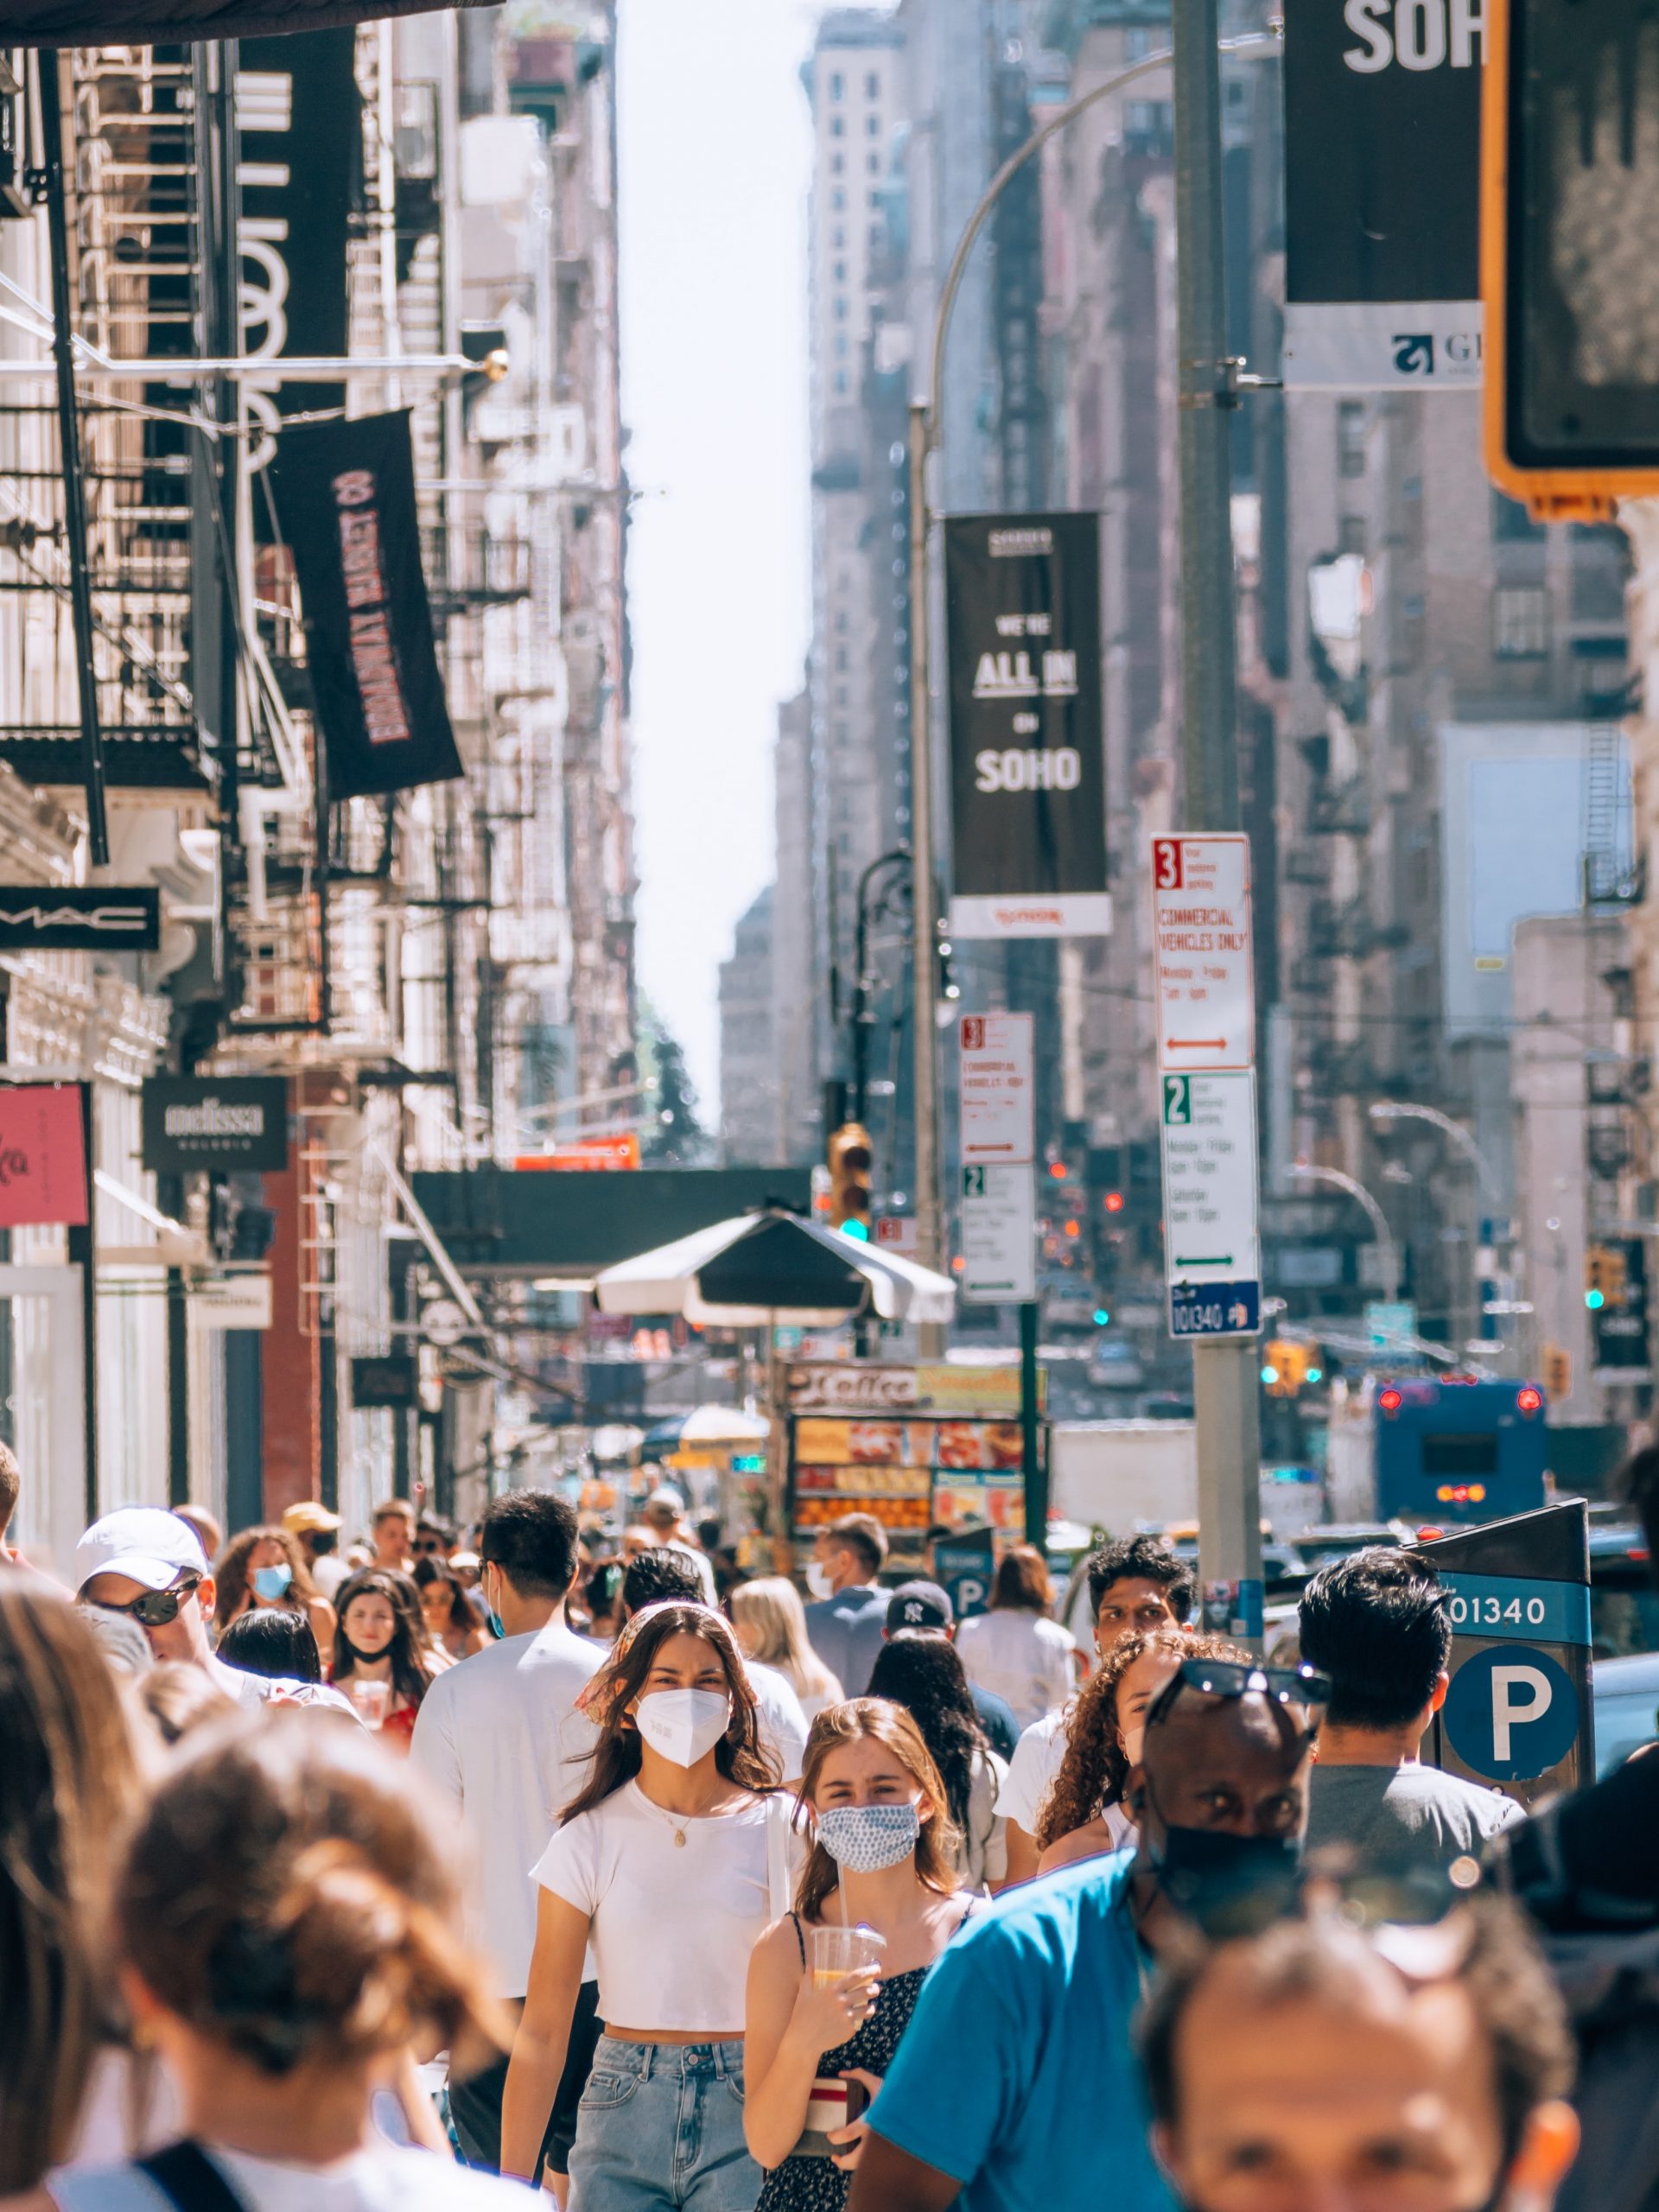 Image of a busy street, possibly in New York City, with lots of people walking down the street while wearing face masks.